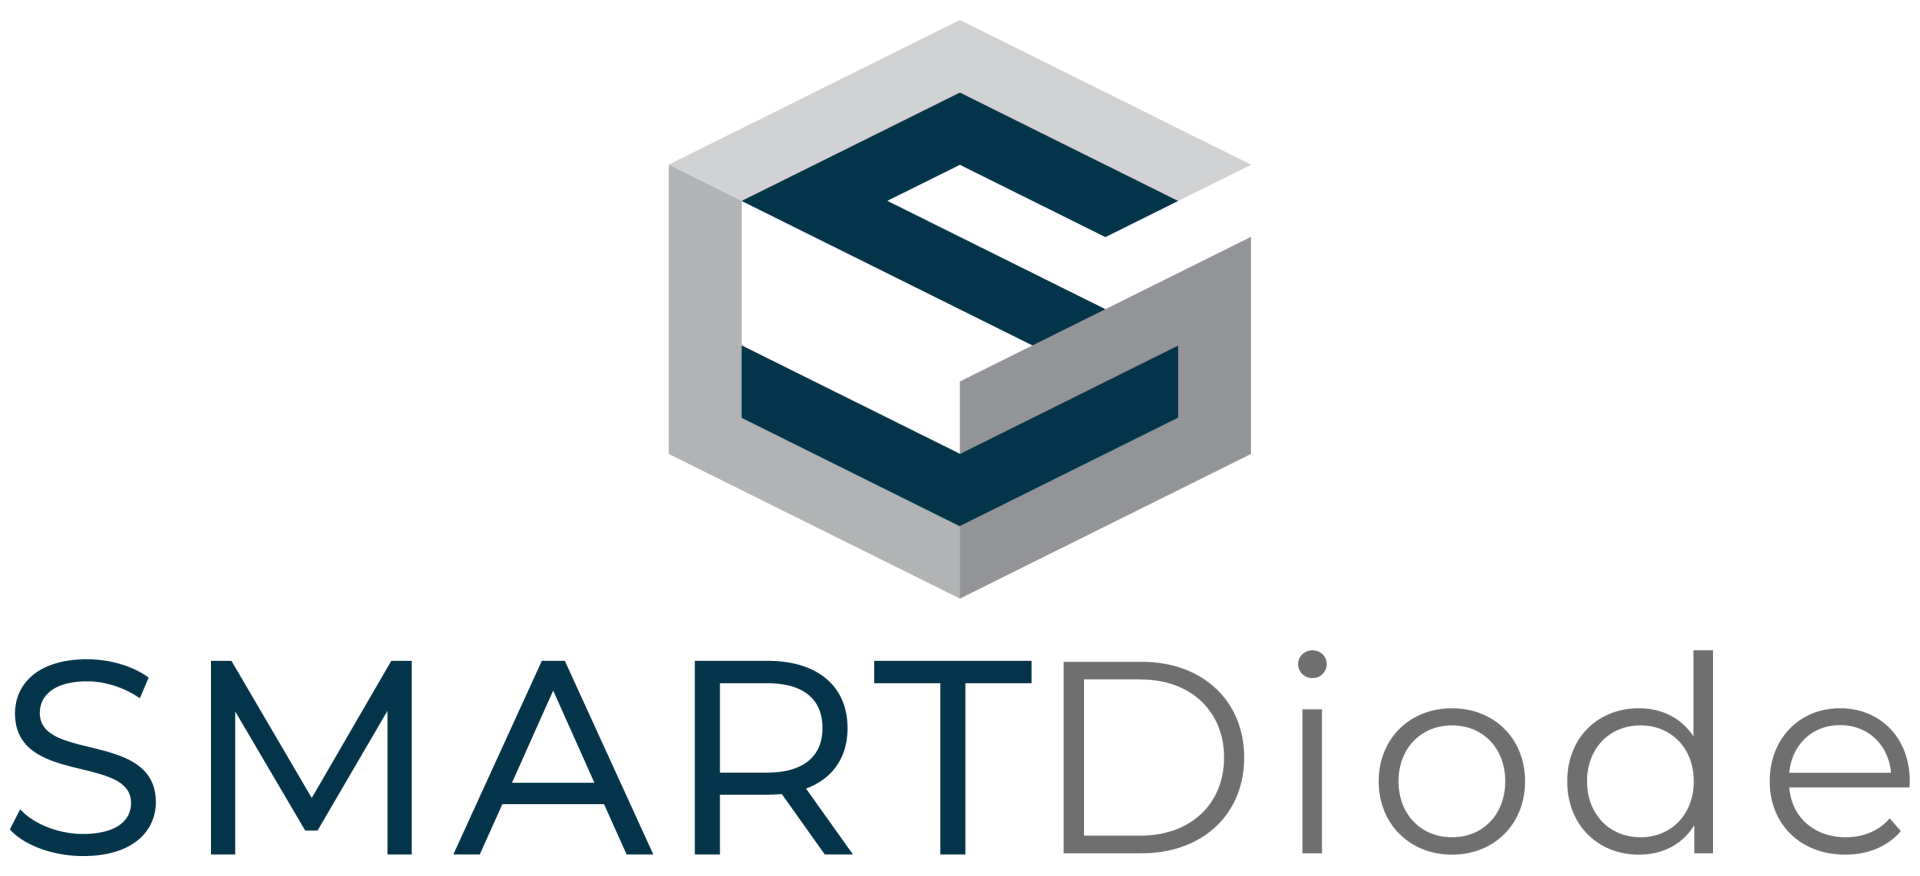 The logo for smartdiode is a cube with the letter s on it.